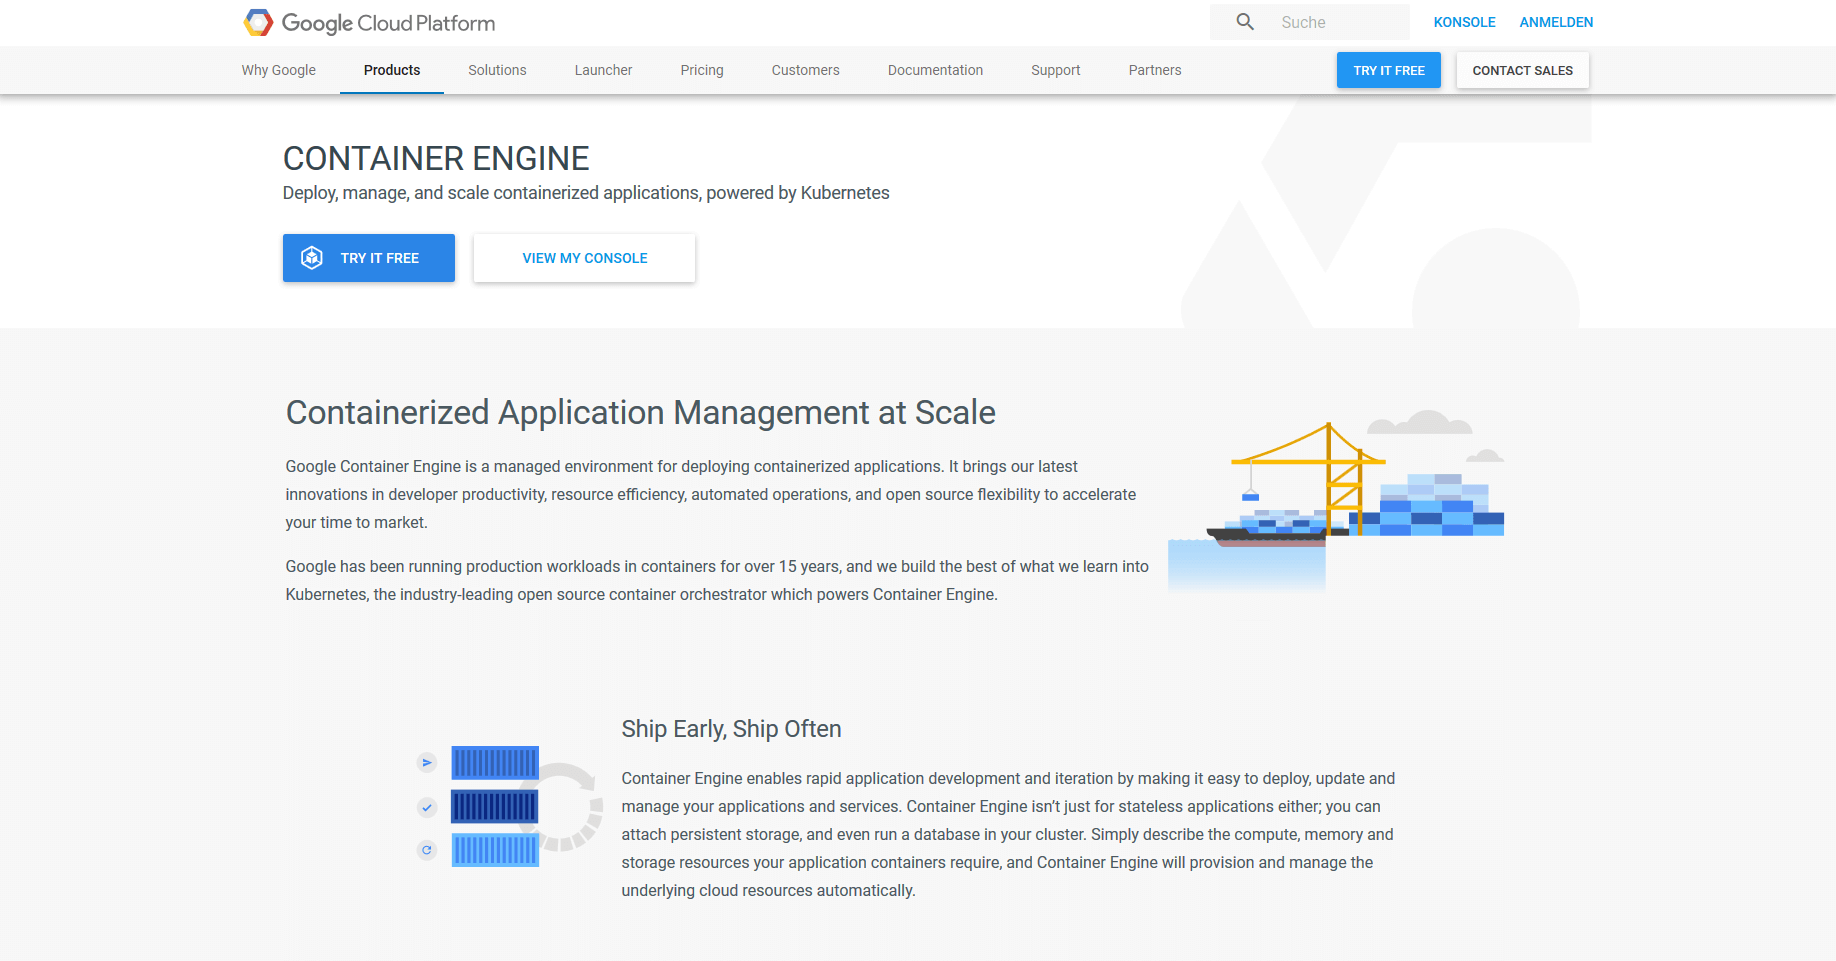 Product web page for Google Container Engine (GKE).